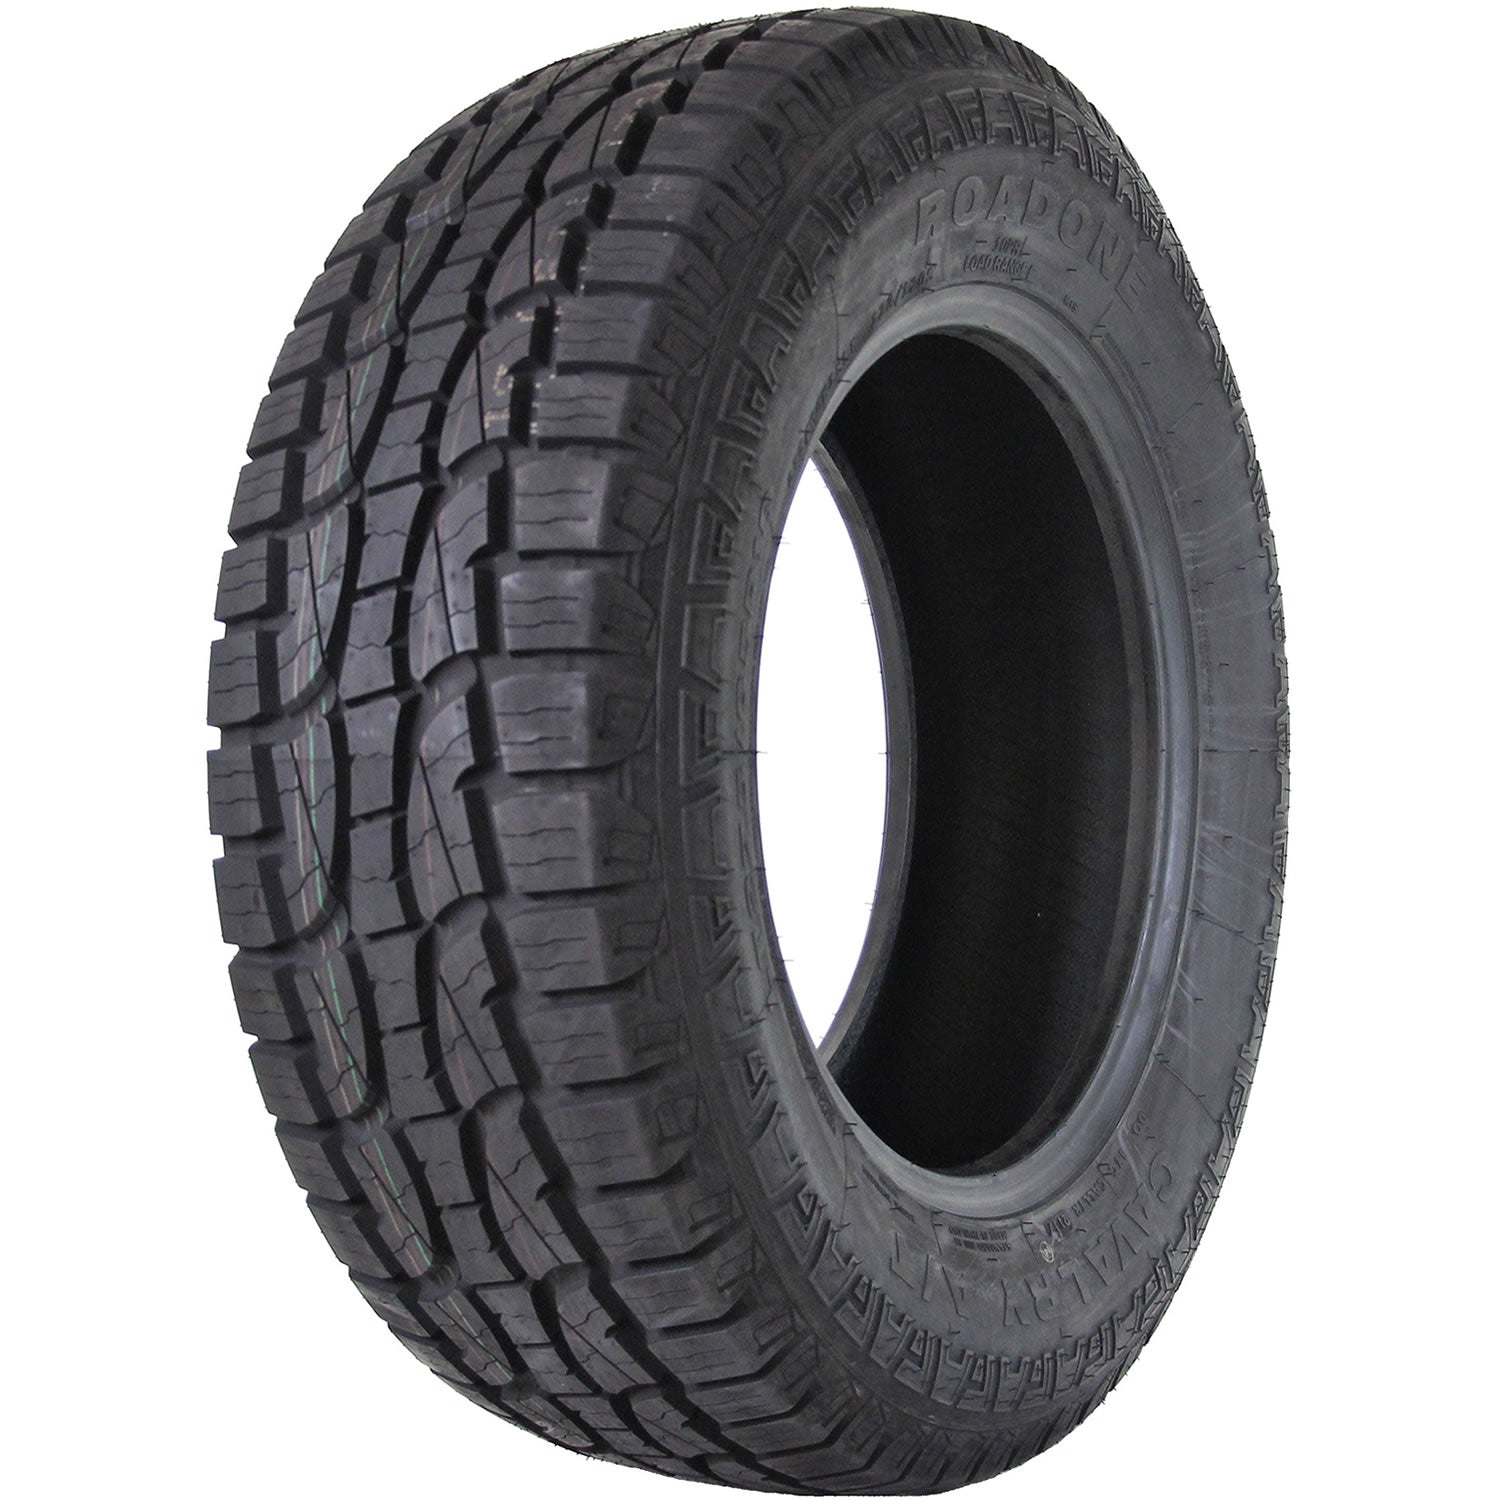 ROAD ONE CAVALRY A/T LT285/55R20 (32.4X11.7R 20) Tires